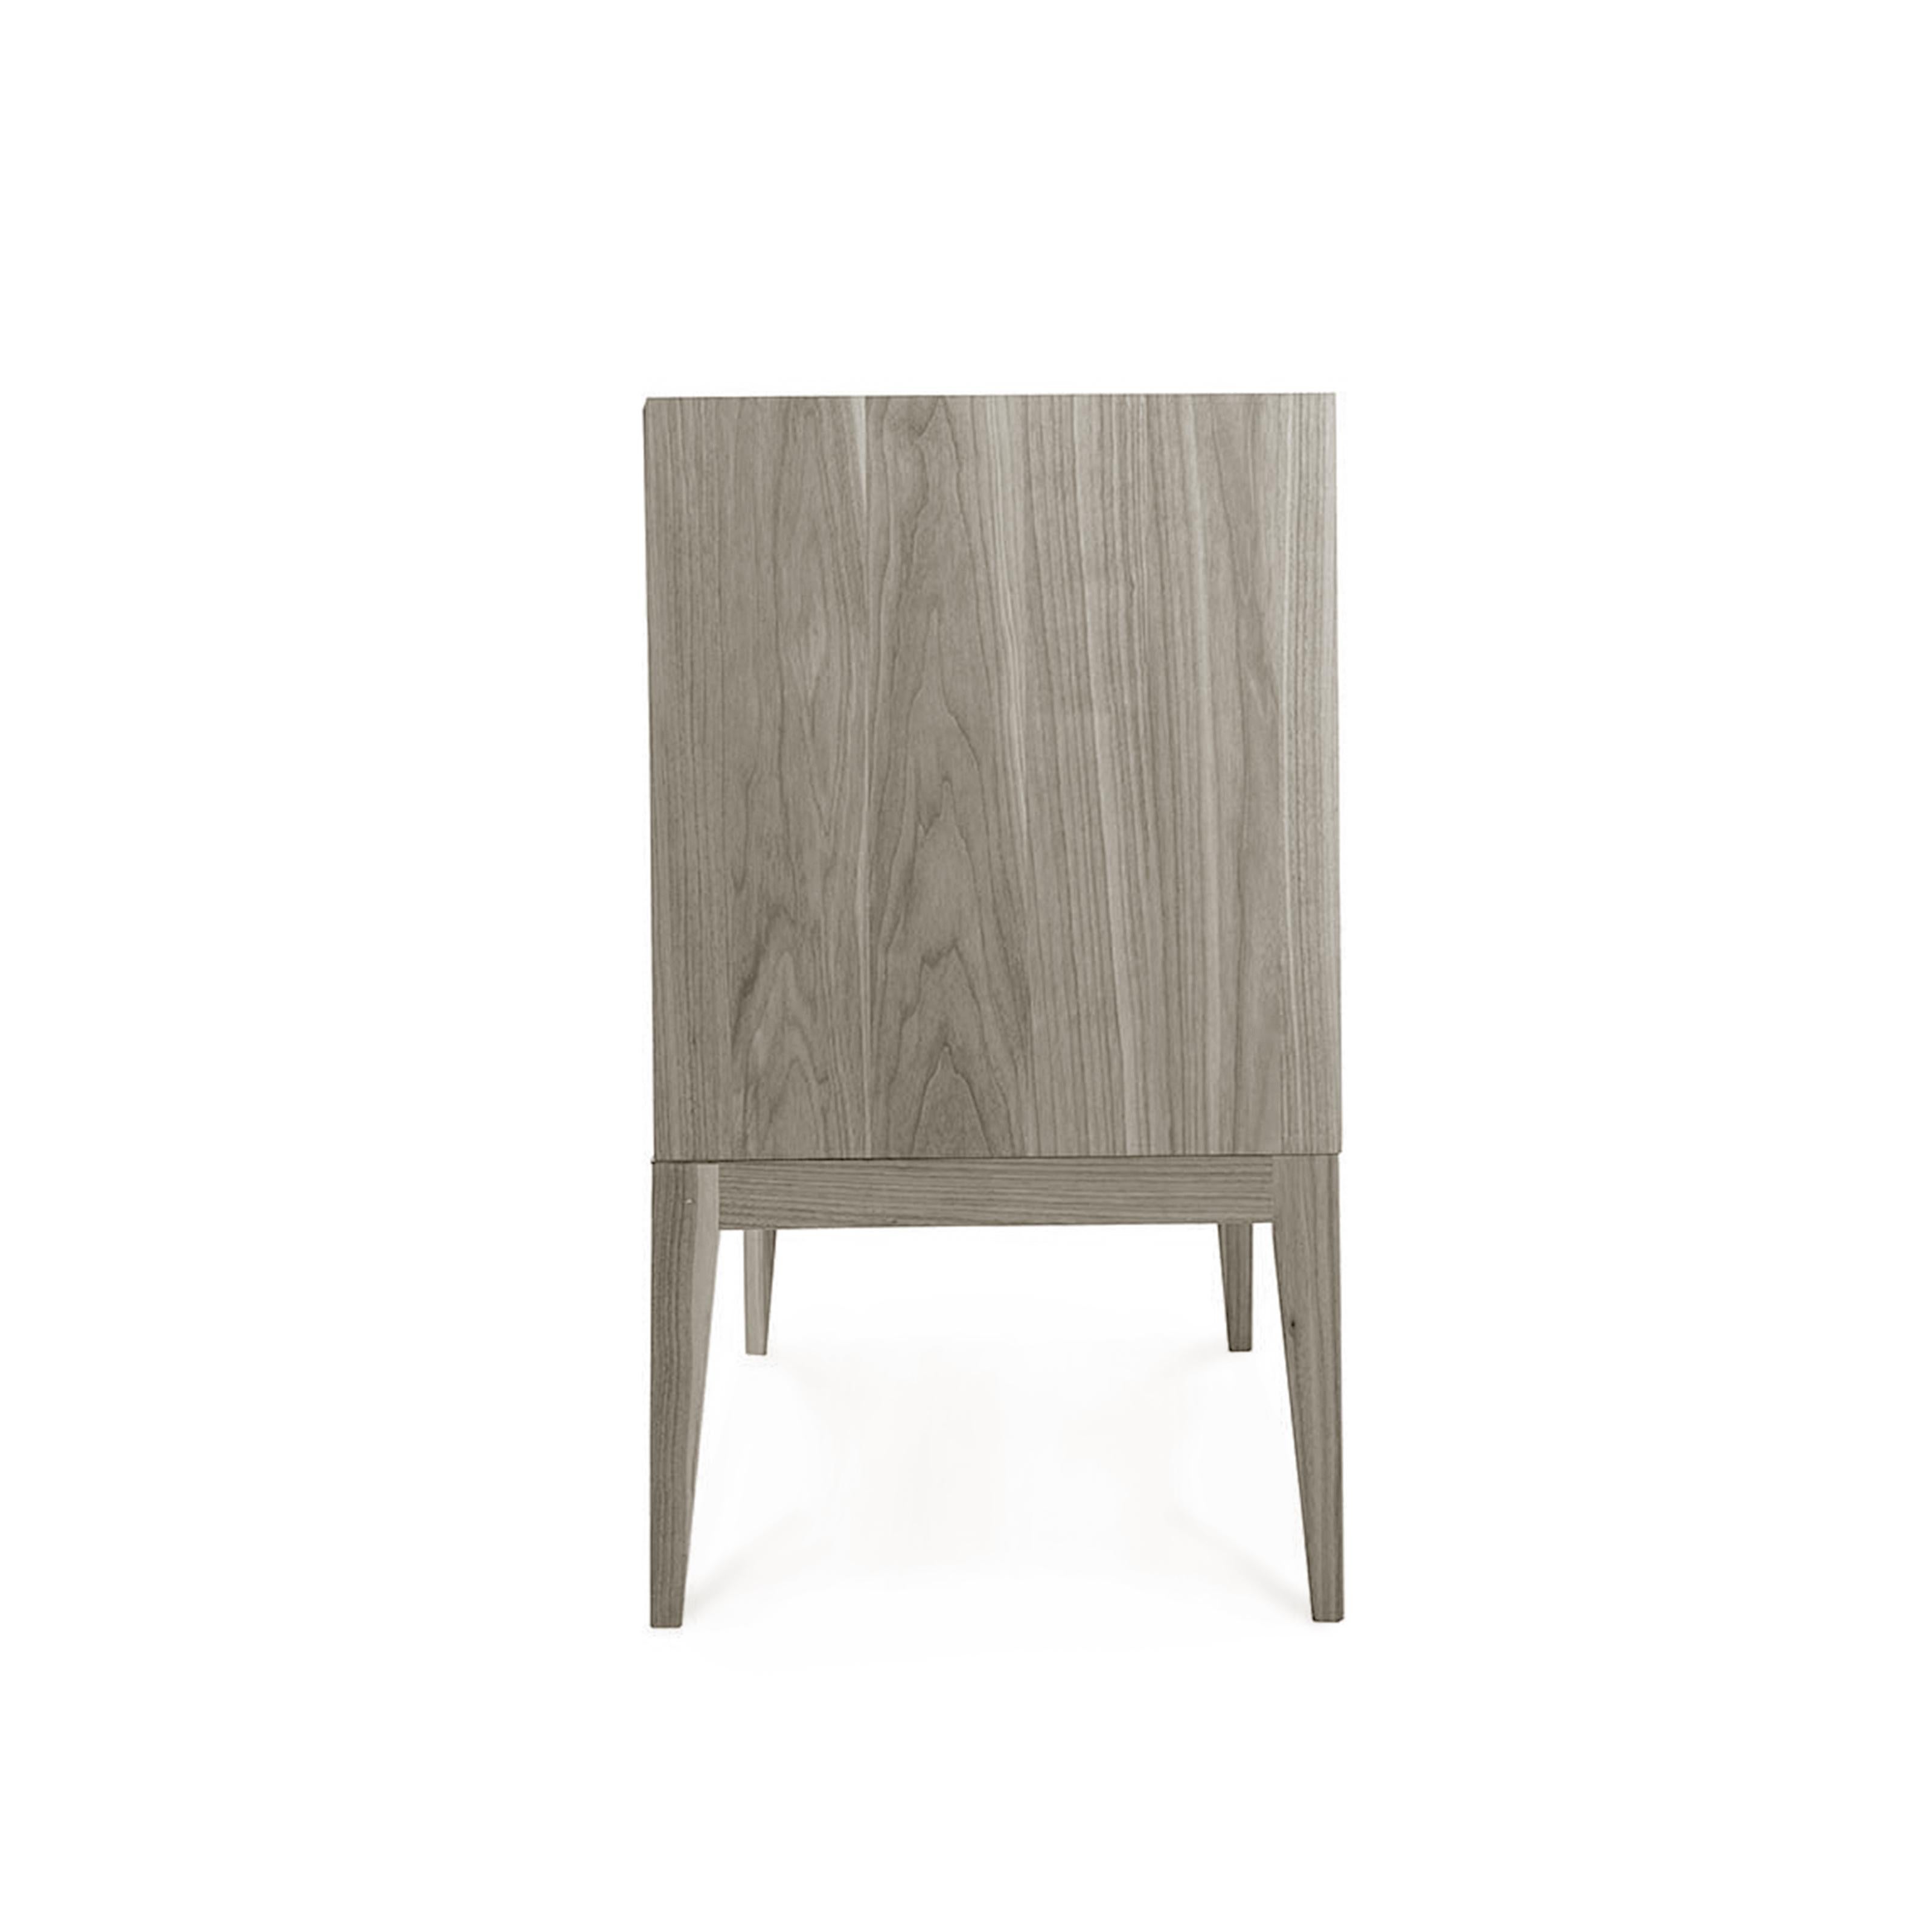 Modern Eleva Solid Wood Dresser, Walnut in Hand-Made Natural Grey Finish, Contemporary For Sale